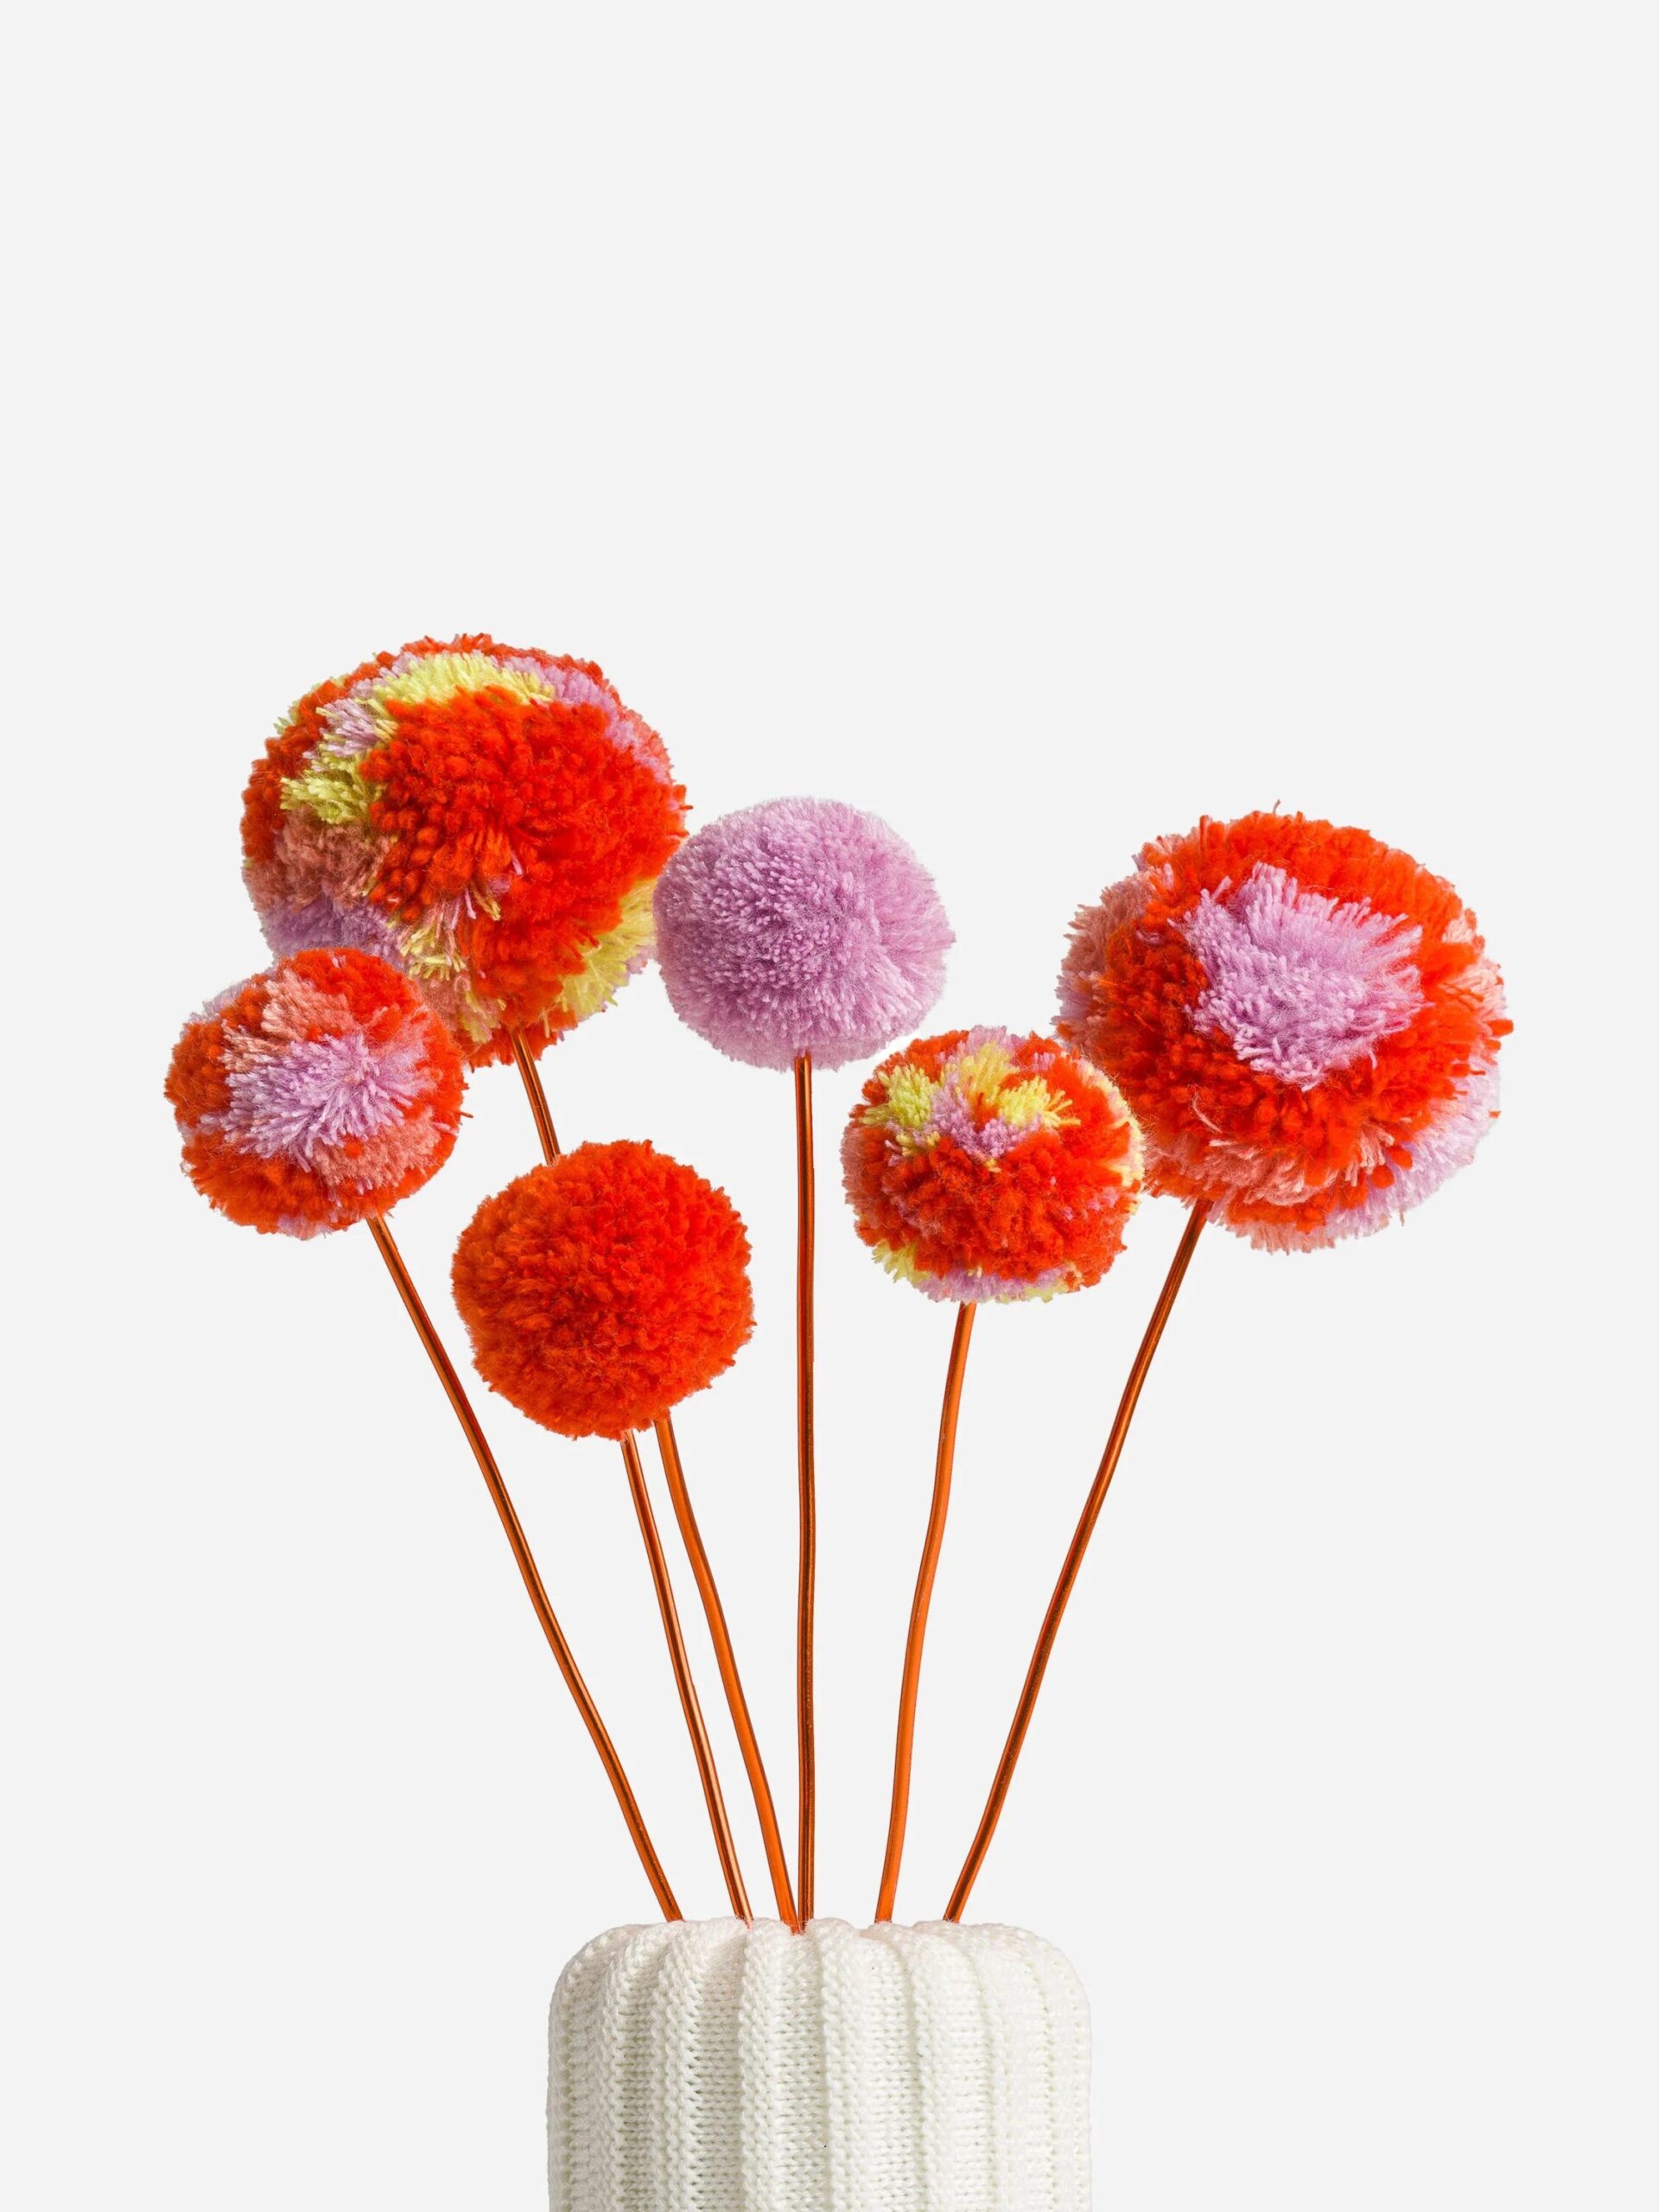 A collection of colorful pompom flowers on thin stems, arranged in a white vase against a plain background.